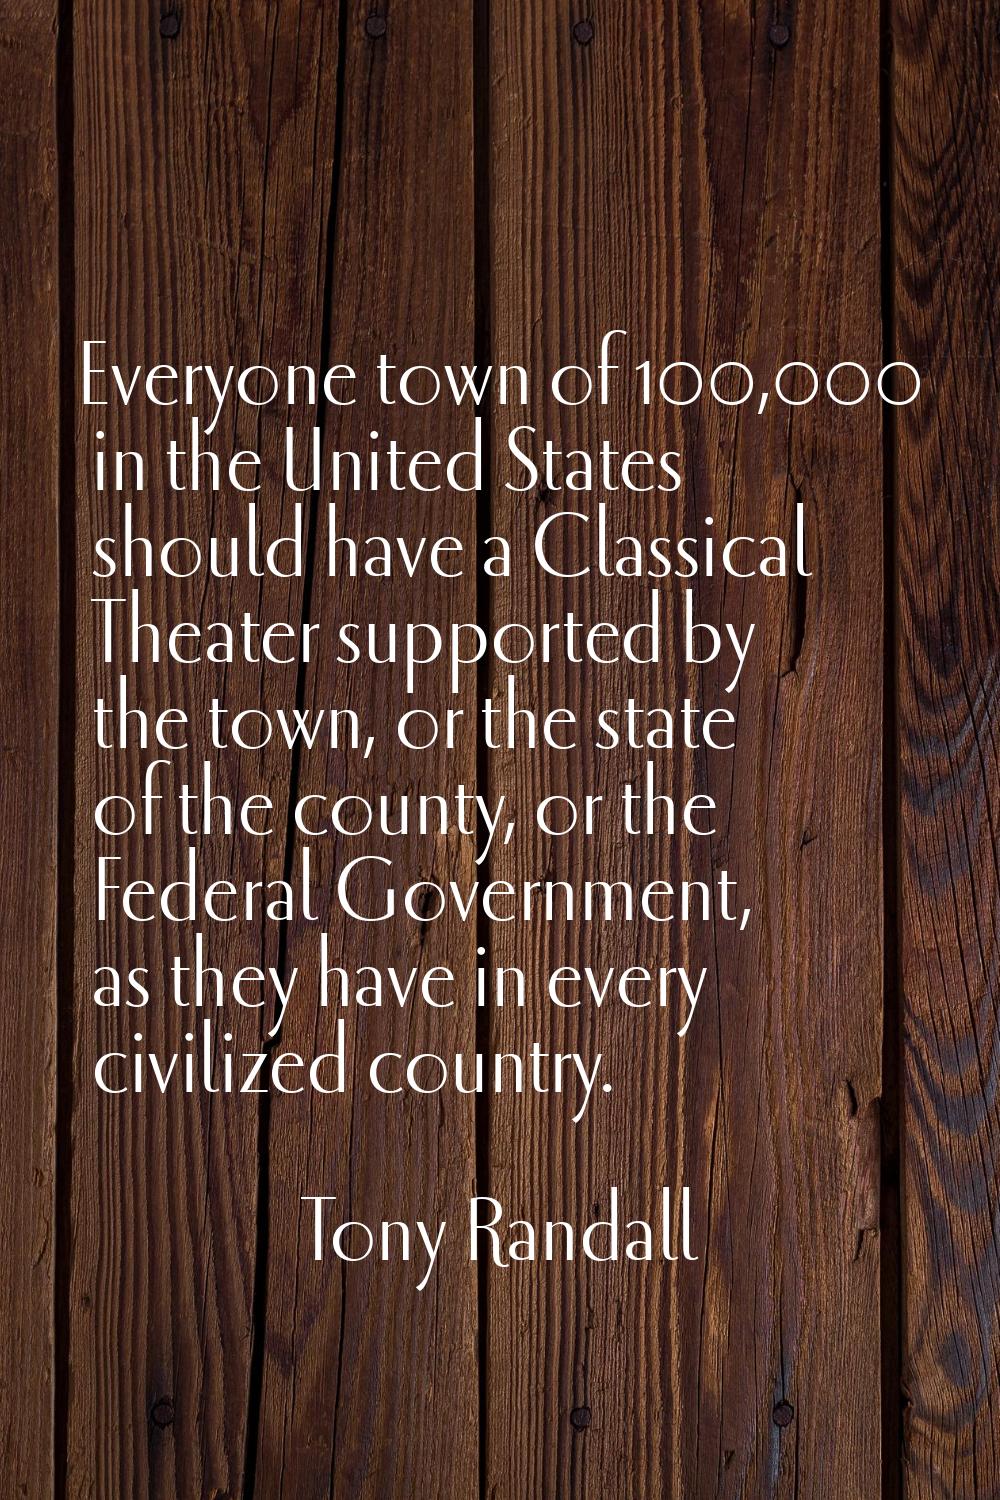 Everyone town of 100,000 in the United States should have a Classical Theater supported by the town